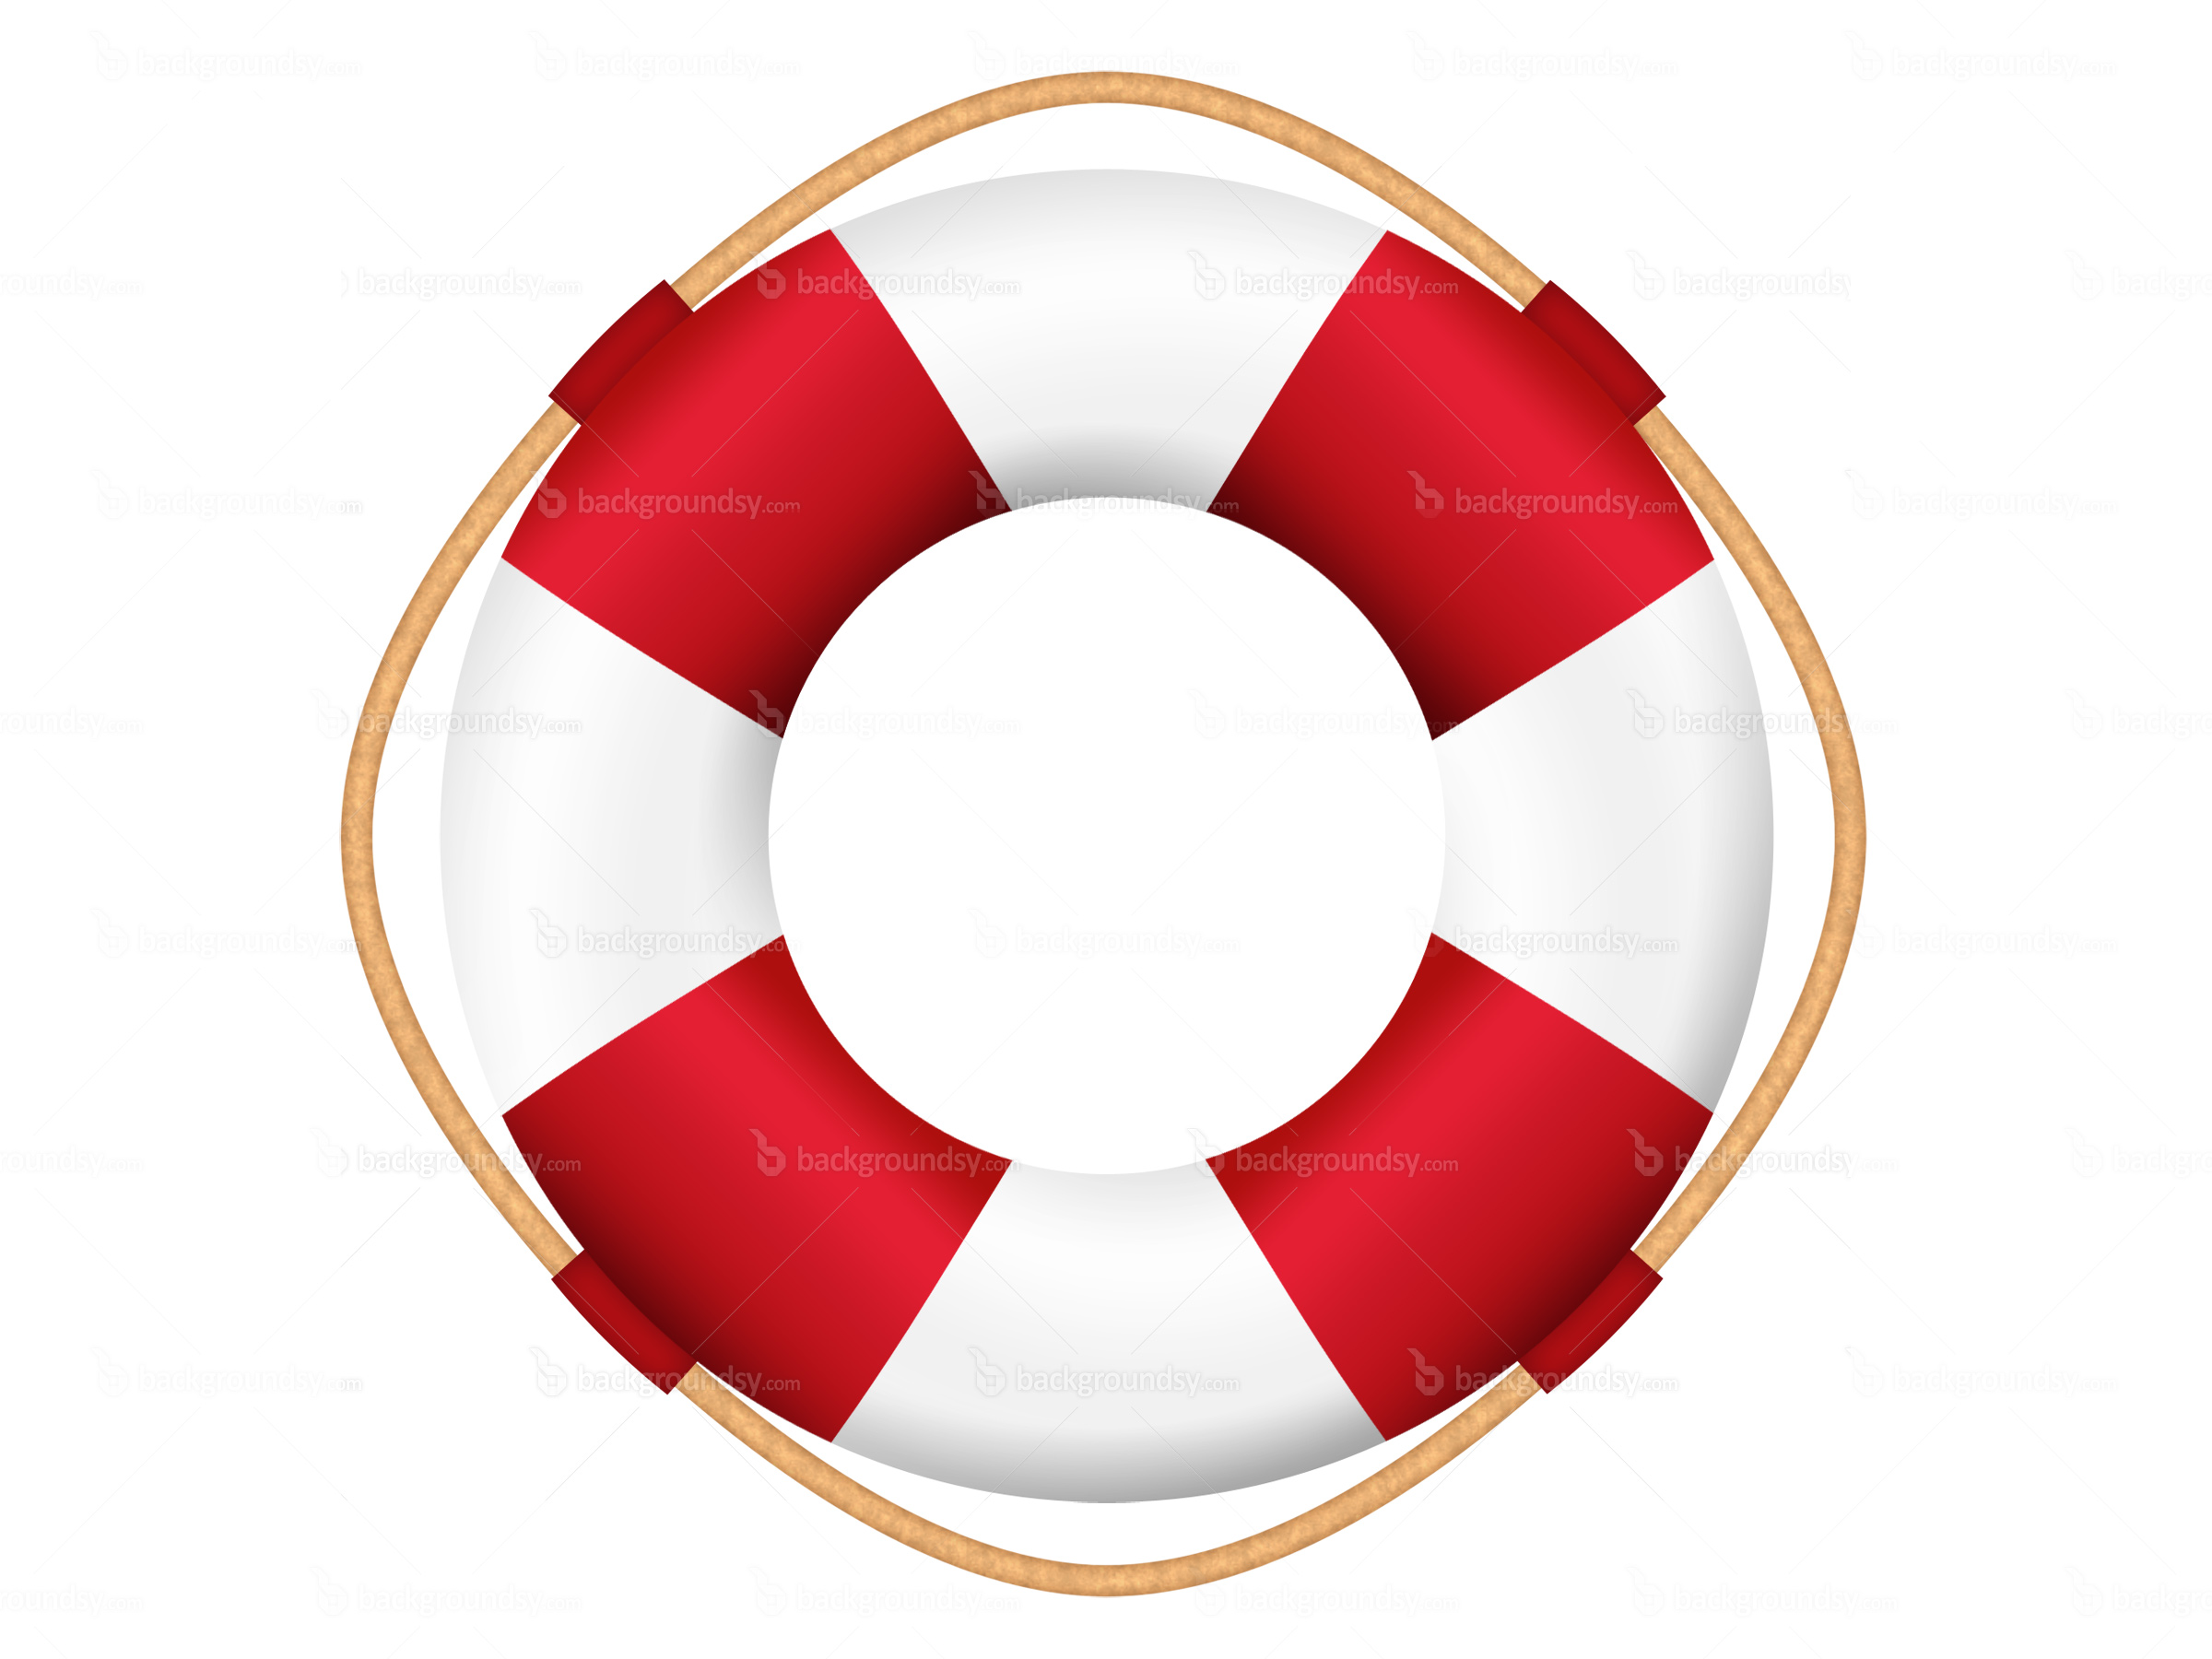 life-preserver-clipart-free-download-on-clipartmag